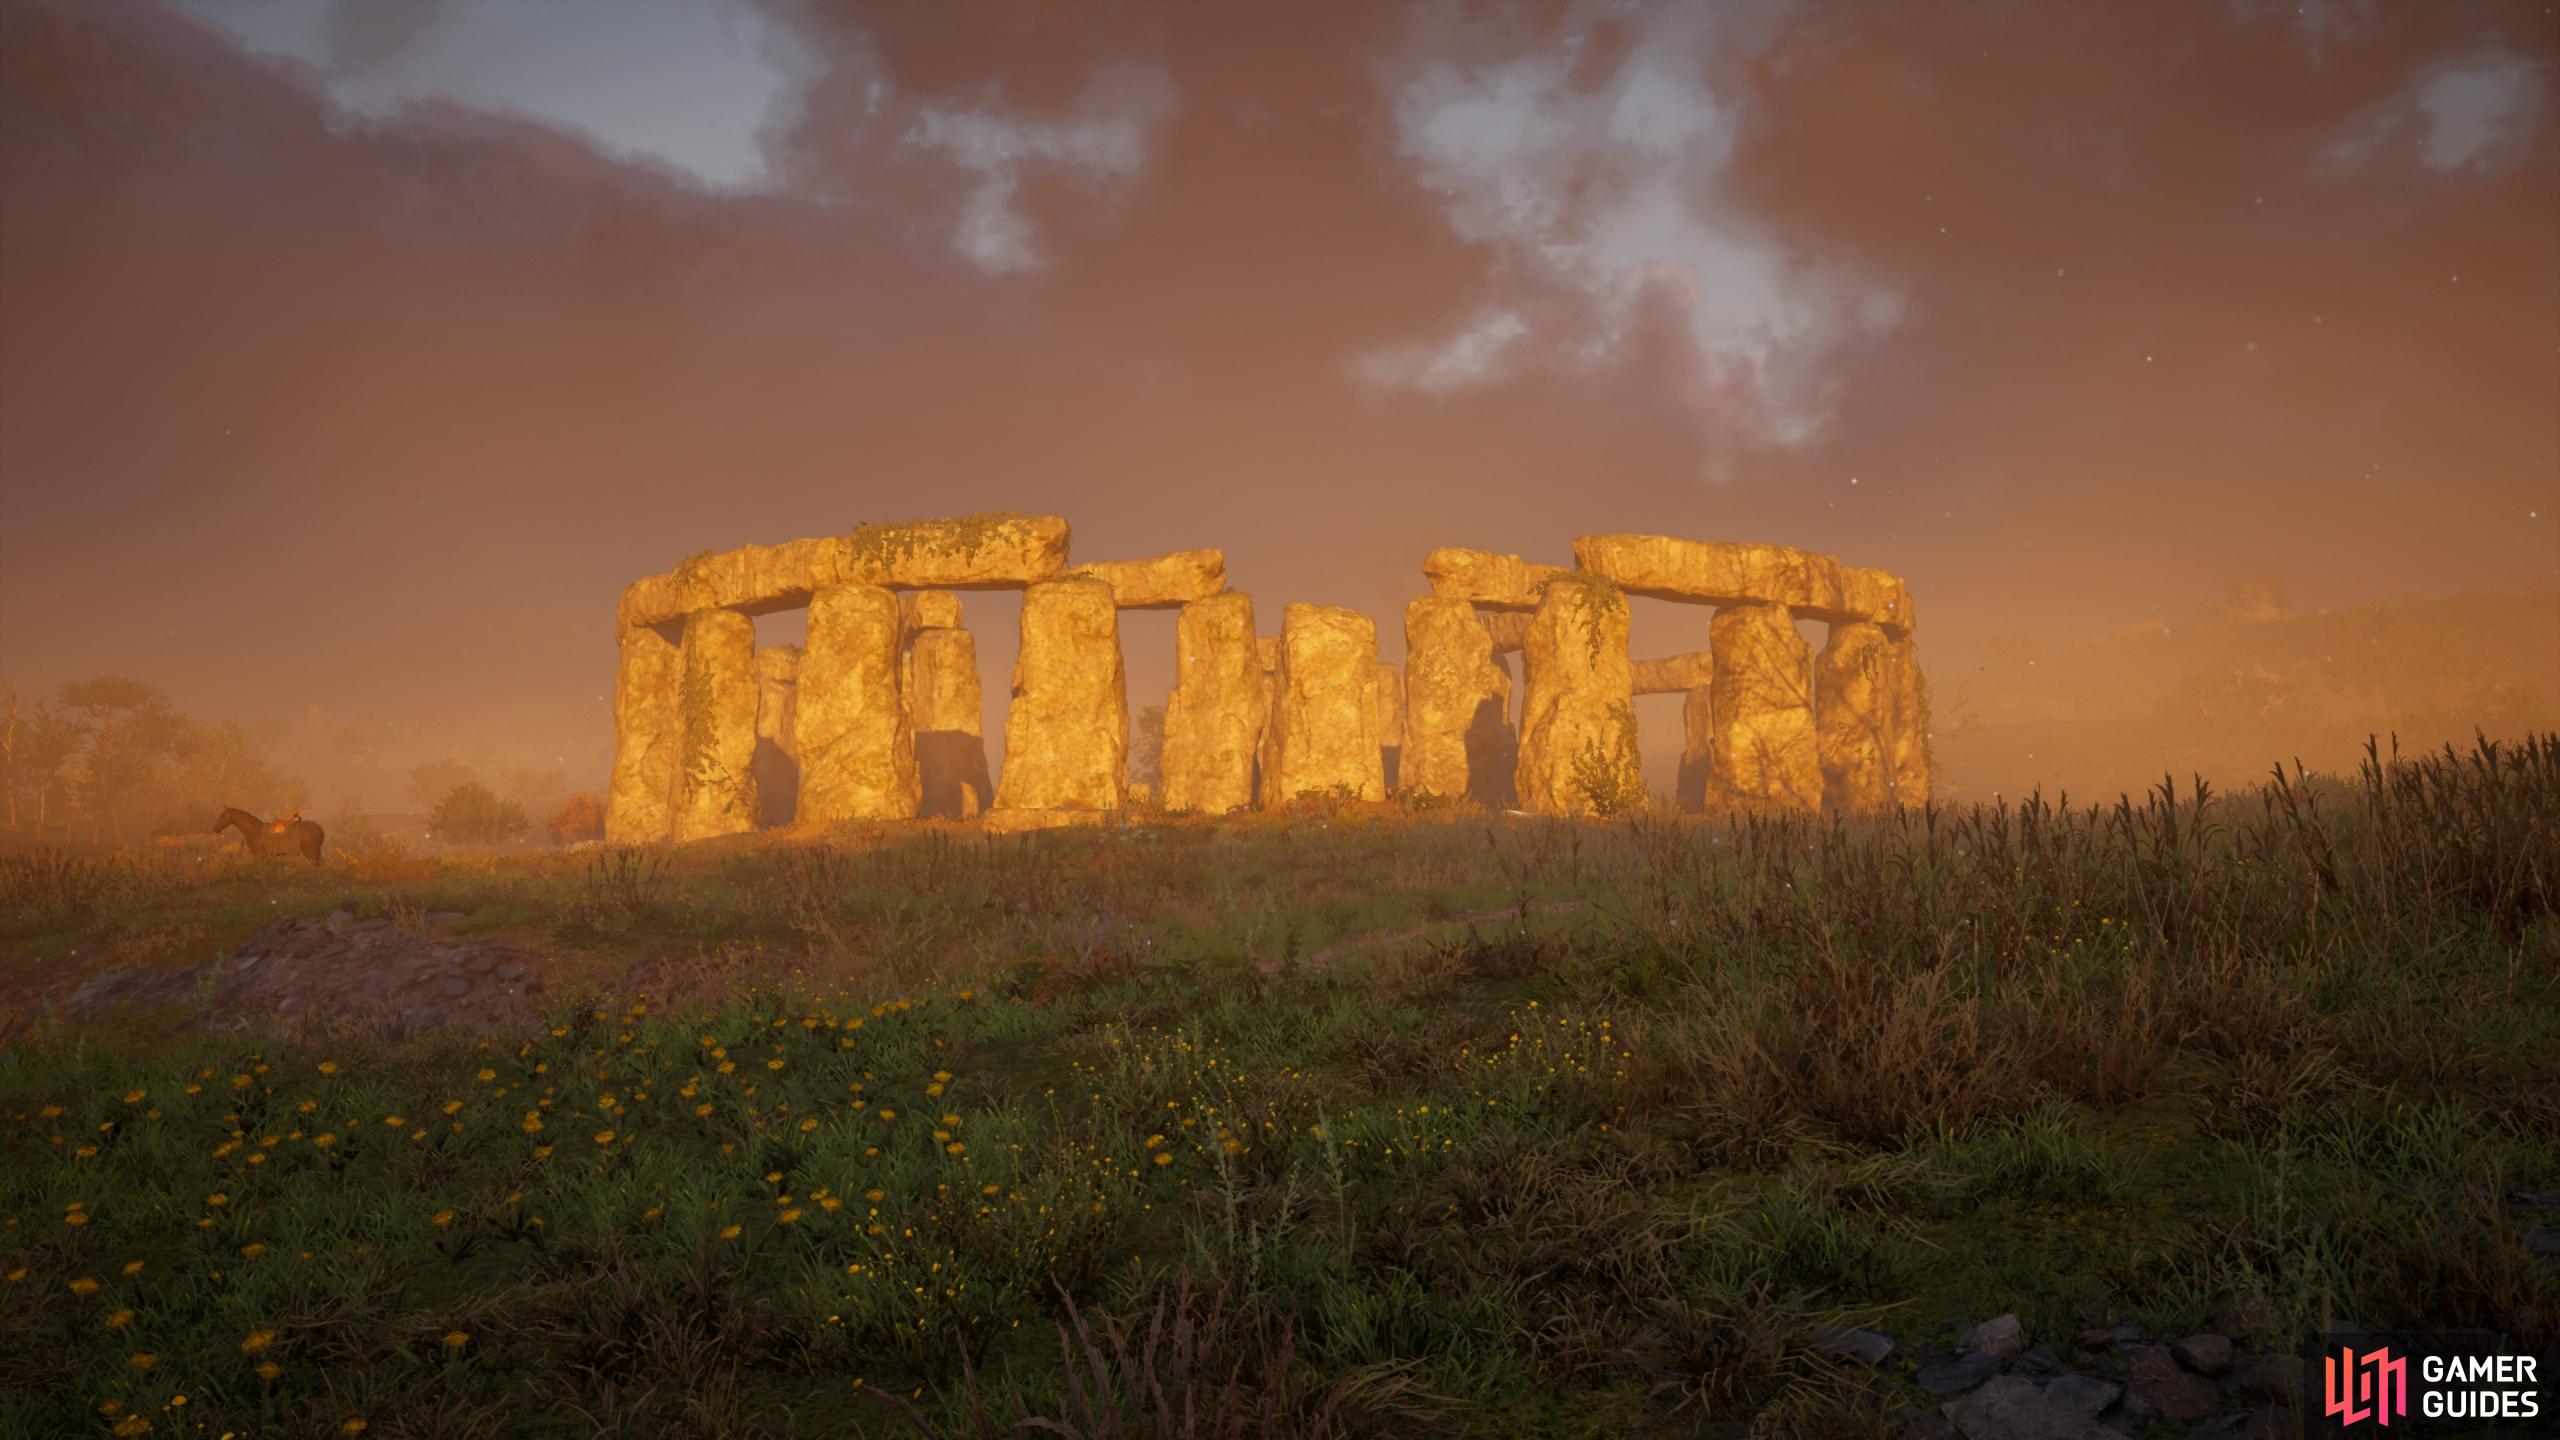 Megalith monuments like the Stonehenge are found across Ireland, so we’ll likely see some more of those in the new expansion.